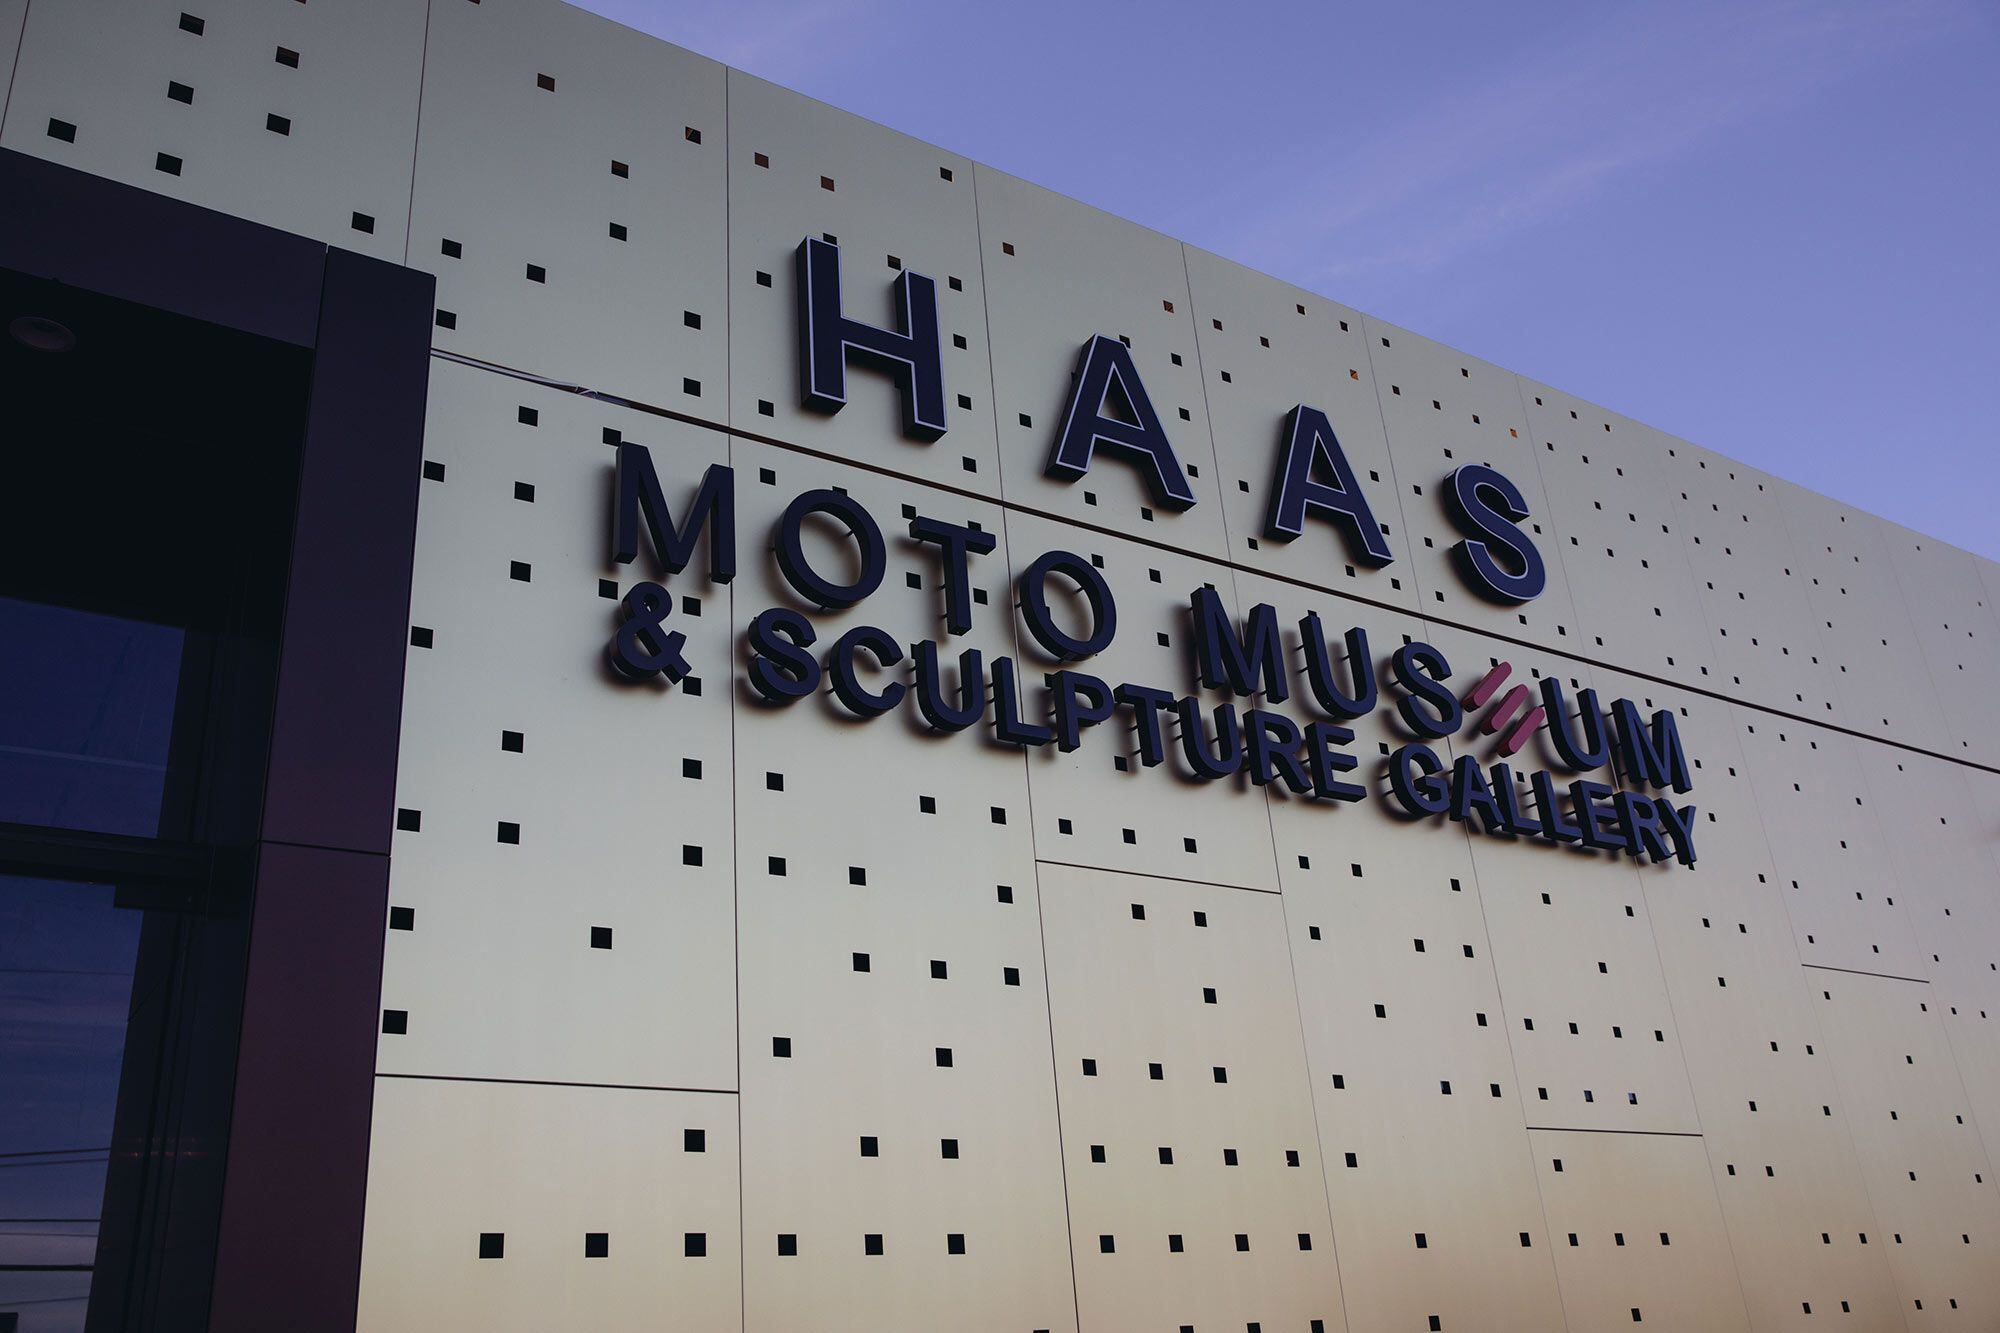 The Haas Moto Museum & Sculpture Gallery, located in Dallas, Texas.